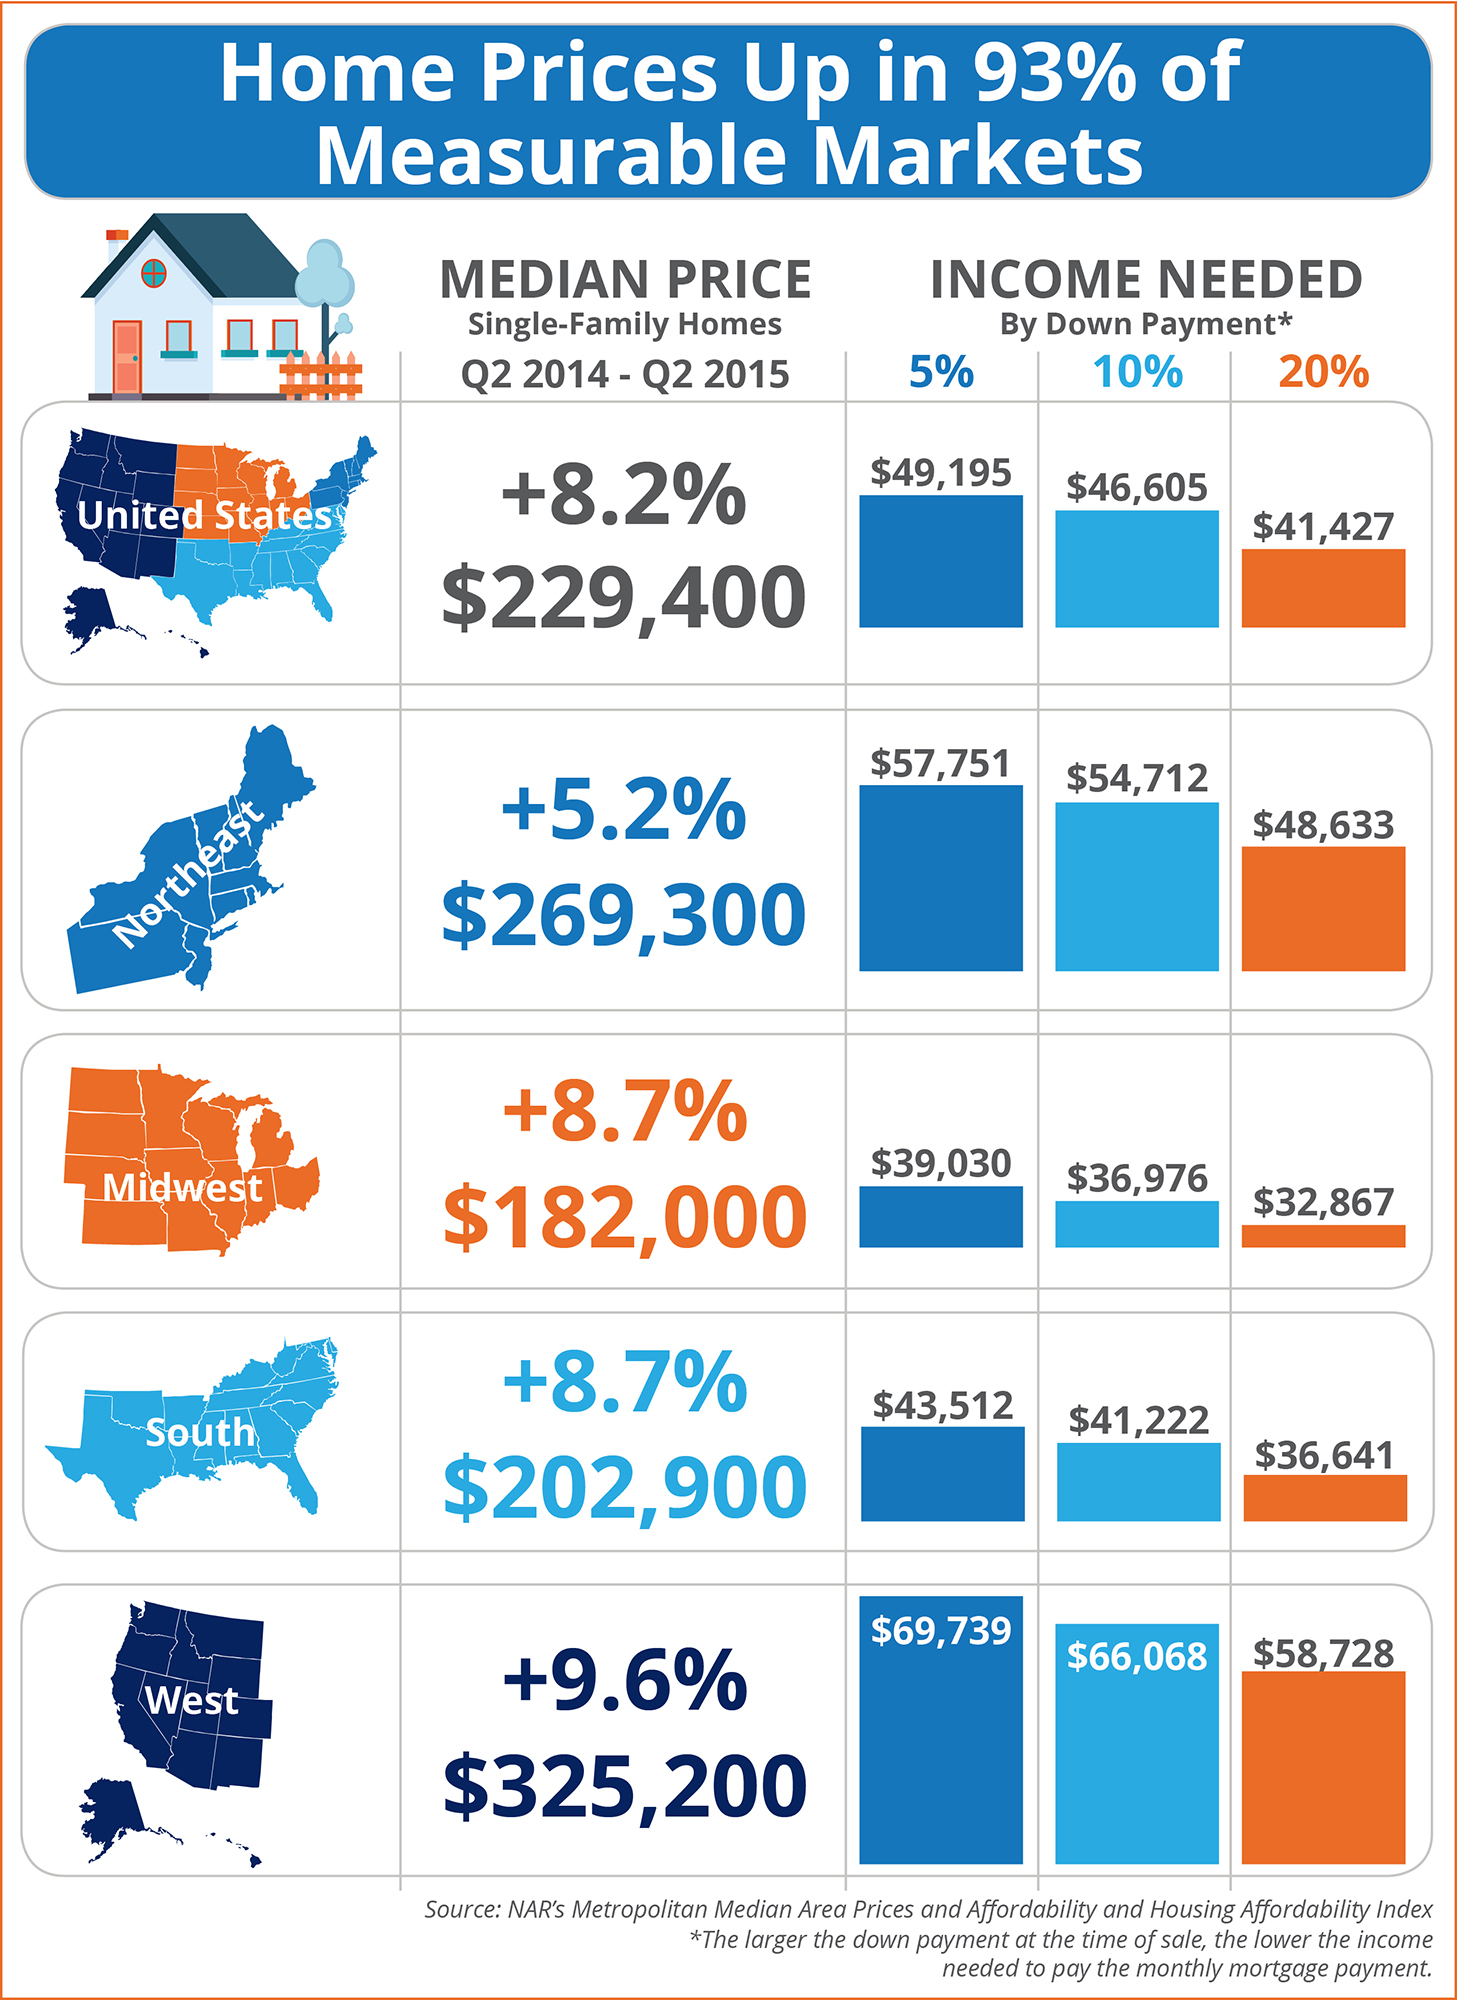 Home Prices Up in 93% of Measurable Markets [INFOGRAPHIC] | Simplifying The Market